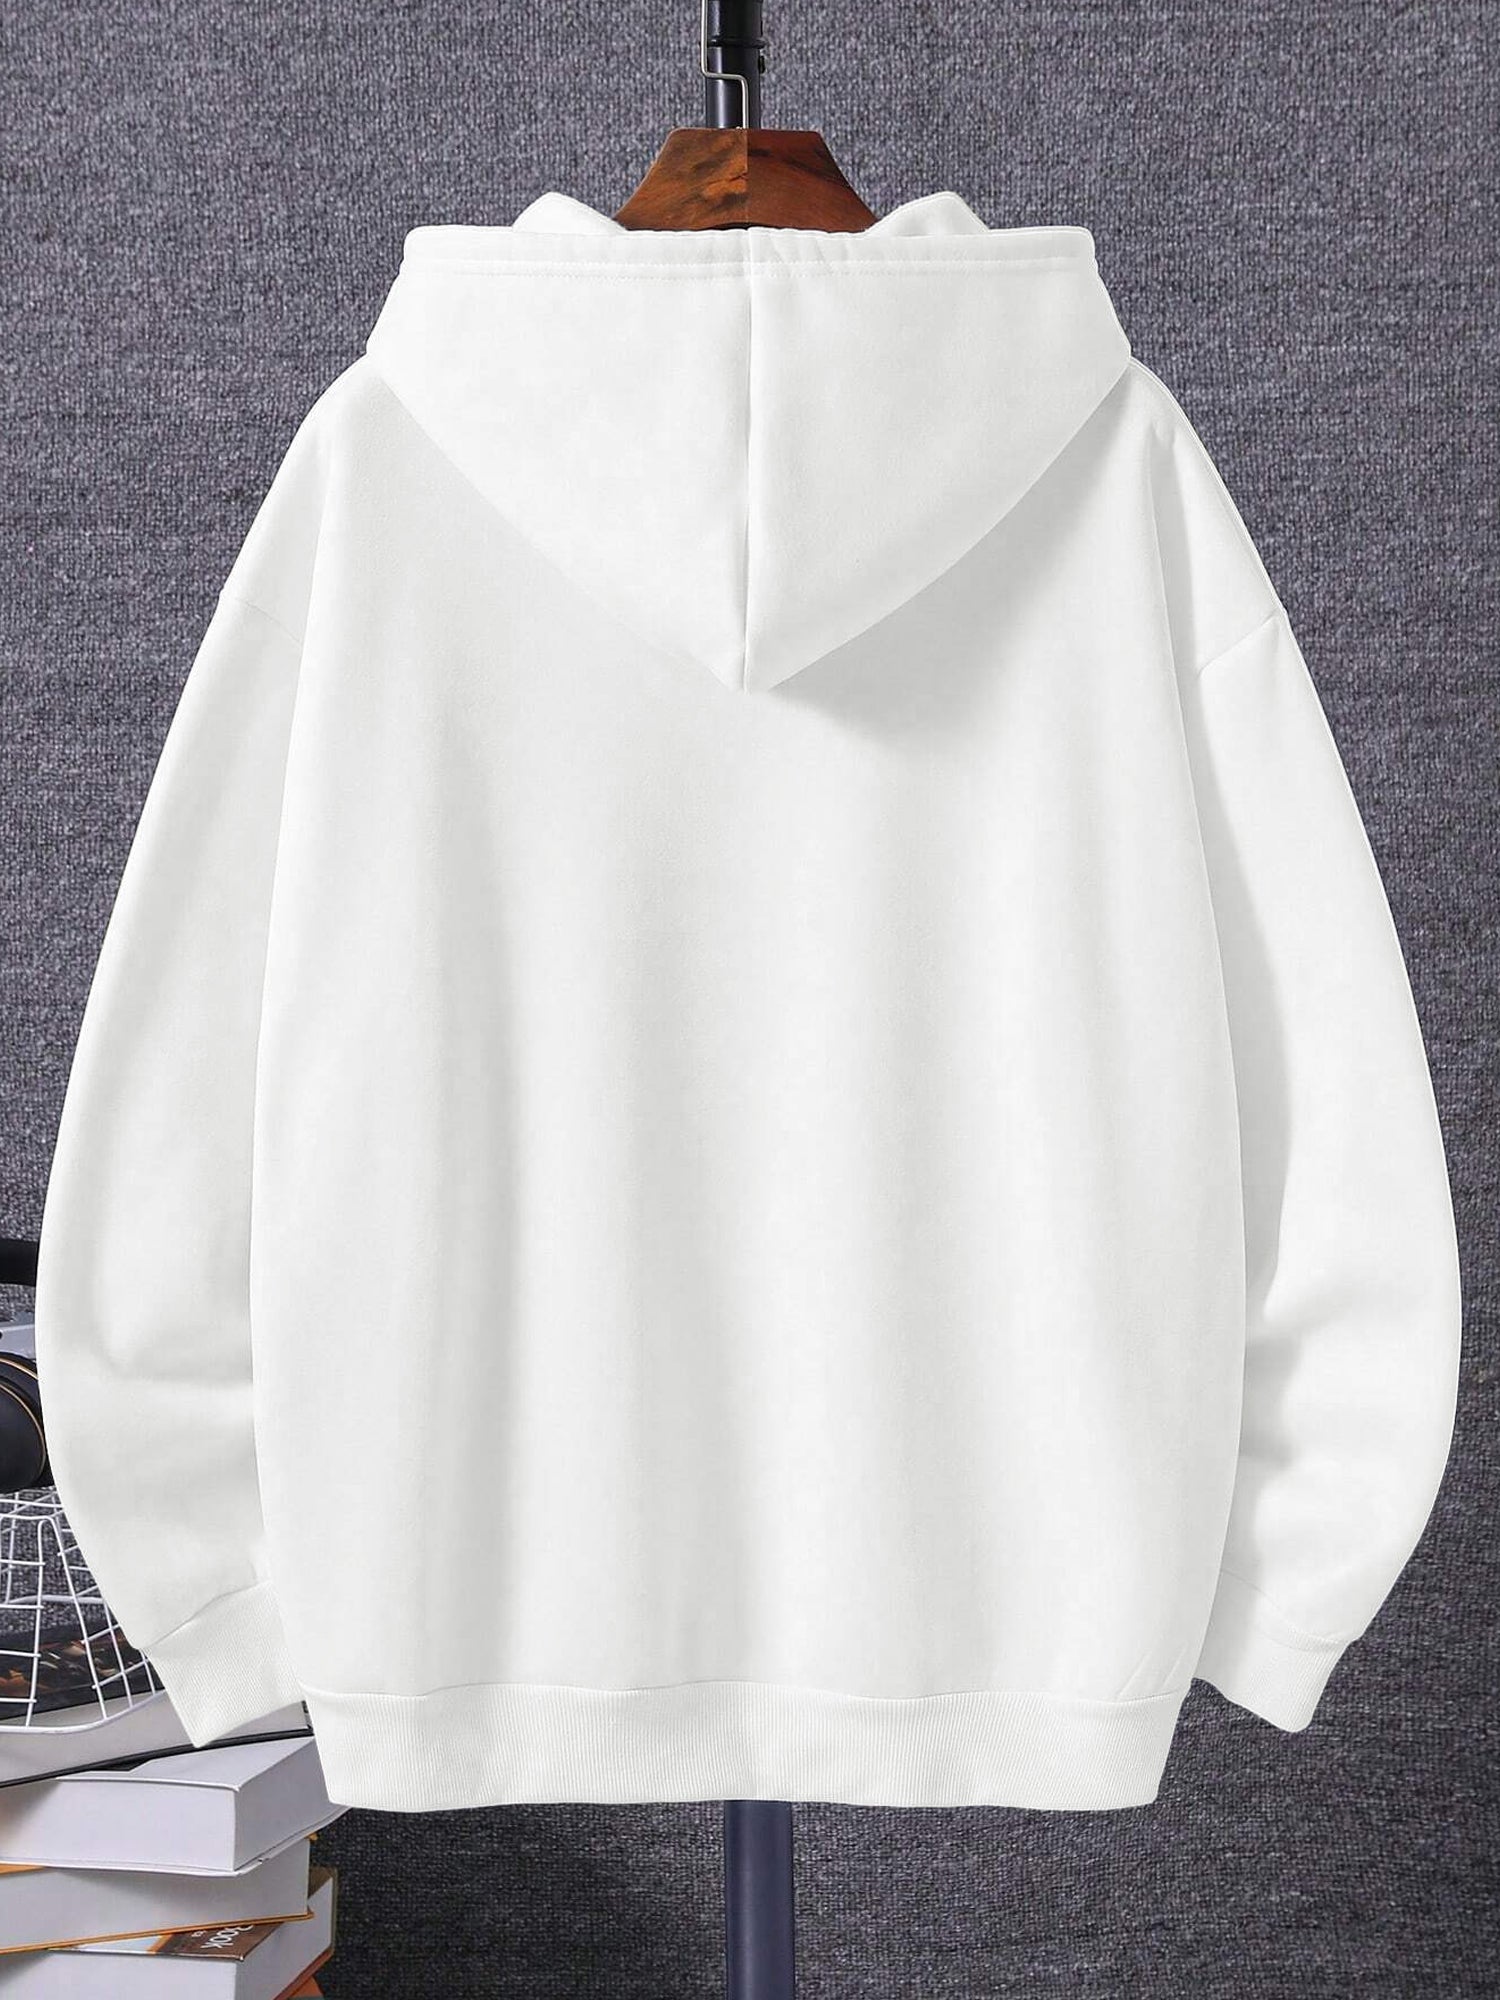 Nyc Polo Terry Fleece Pullover Hoodie For Men-White-SP1354